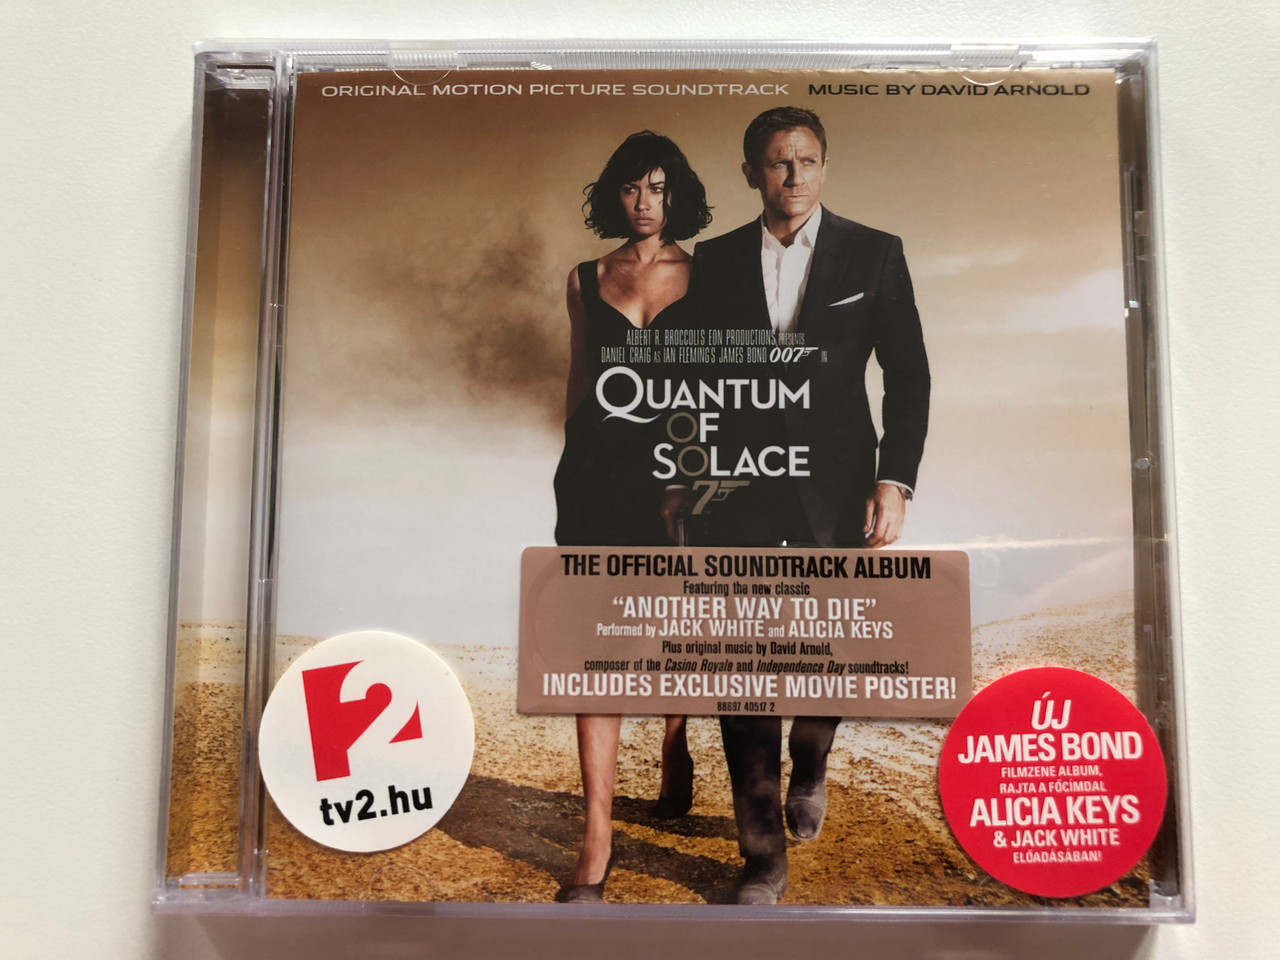 https://cdn10.bigcommerce.com/s-62bdpkt7pb/products/0/images/207050/Quantum_Of_Solace_Original_Motion_Picture_Soundtrack_-_Music_By_David_Arnold_The_Official_Soundtrack_Album_Featuring_The_New_Classic_Another_Way_To_Die_Performed_by_Jack_White_and_Al_1__38972.1642181060.1280.1280.JPG?c=2&_gl=1*veantc*_ga*MjA2NTIxMjE2MC4xNTkwNTEyNTMy*_ga_WS2VZYPC6G*MTY0MjE3MzQyOC4yNjMuMS4xNjQyMTgwNzI1LjM2